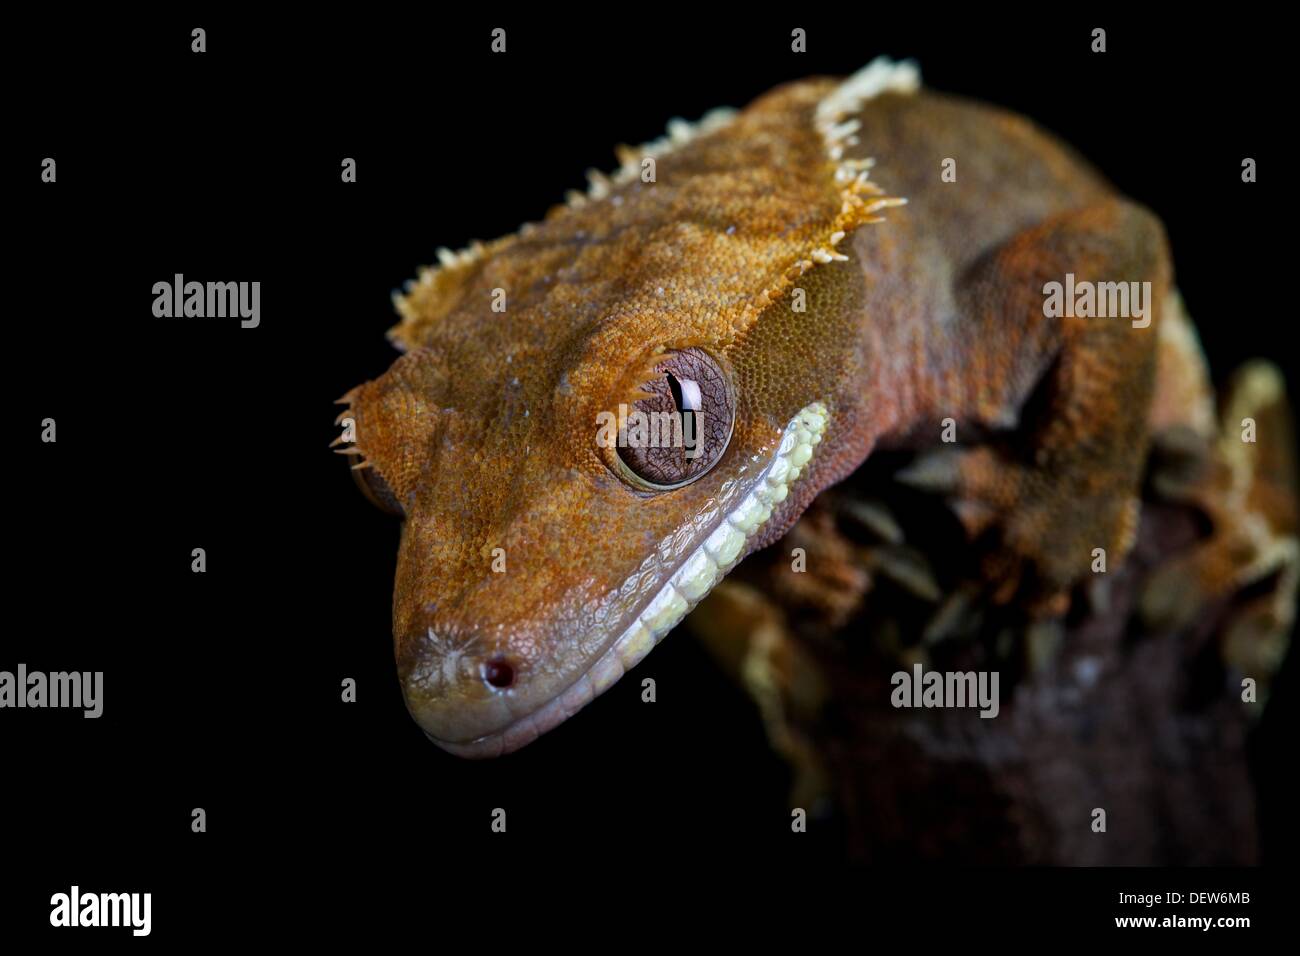 Captive, Private Collection  Crested Gecko Stock Photo